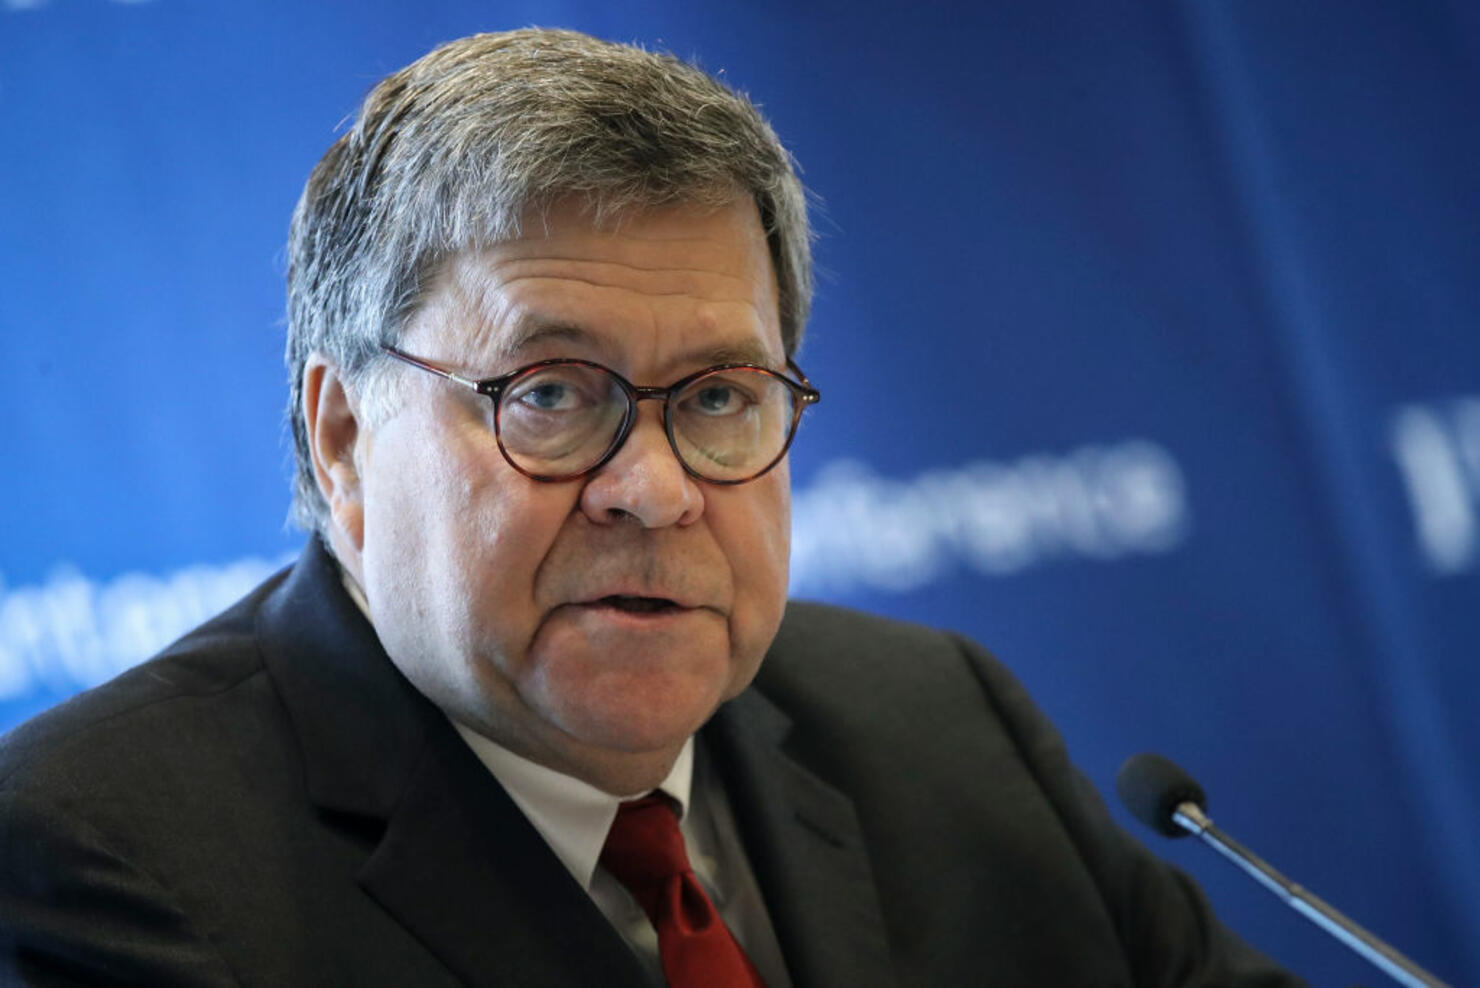 Attorney General William Barr Gives Opening Remarks At Cyber Security Conference